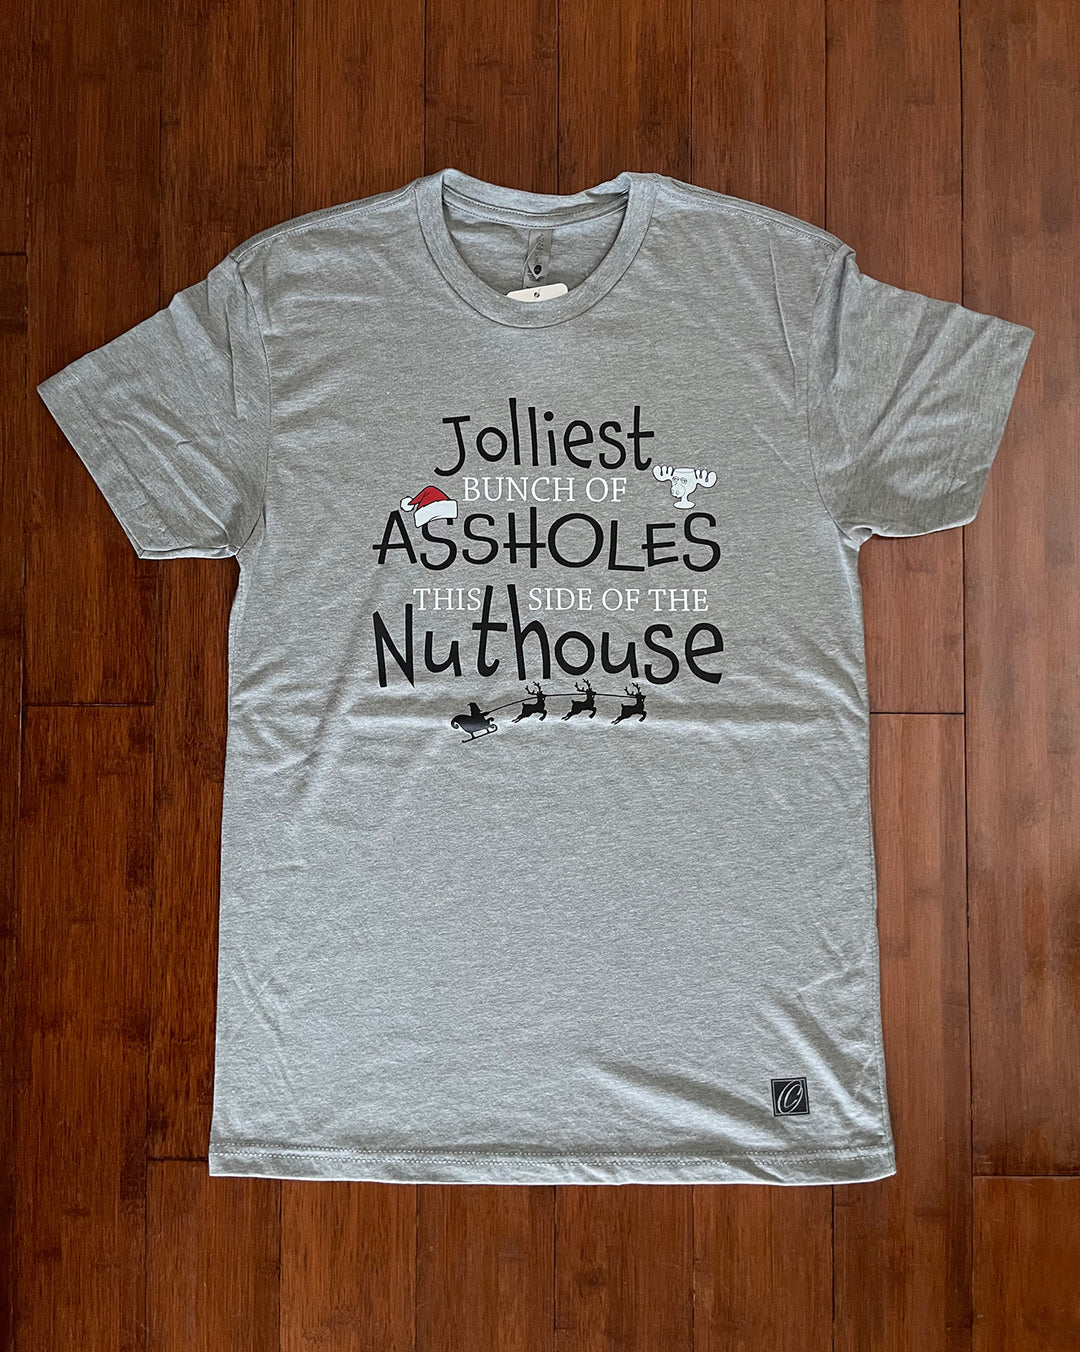 Adult S Next Level Heather CVC Crewneck Short Sleeve Tee - Jolliest Bunch of Assholes This Side of the Nuthouse - Christmas Vacation